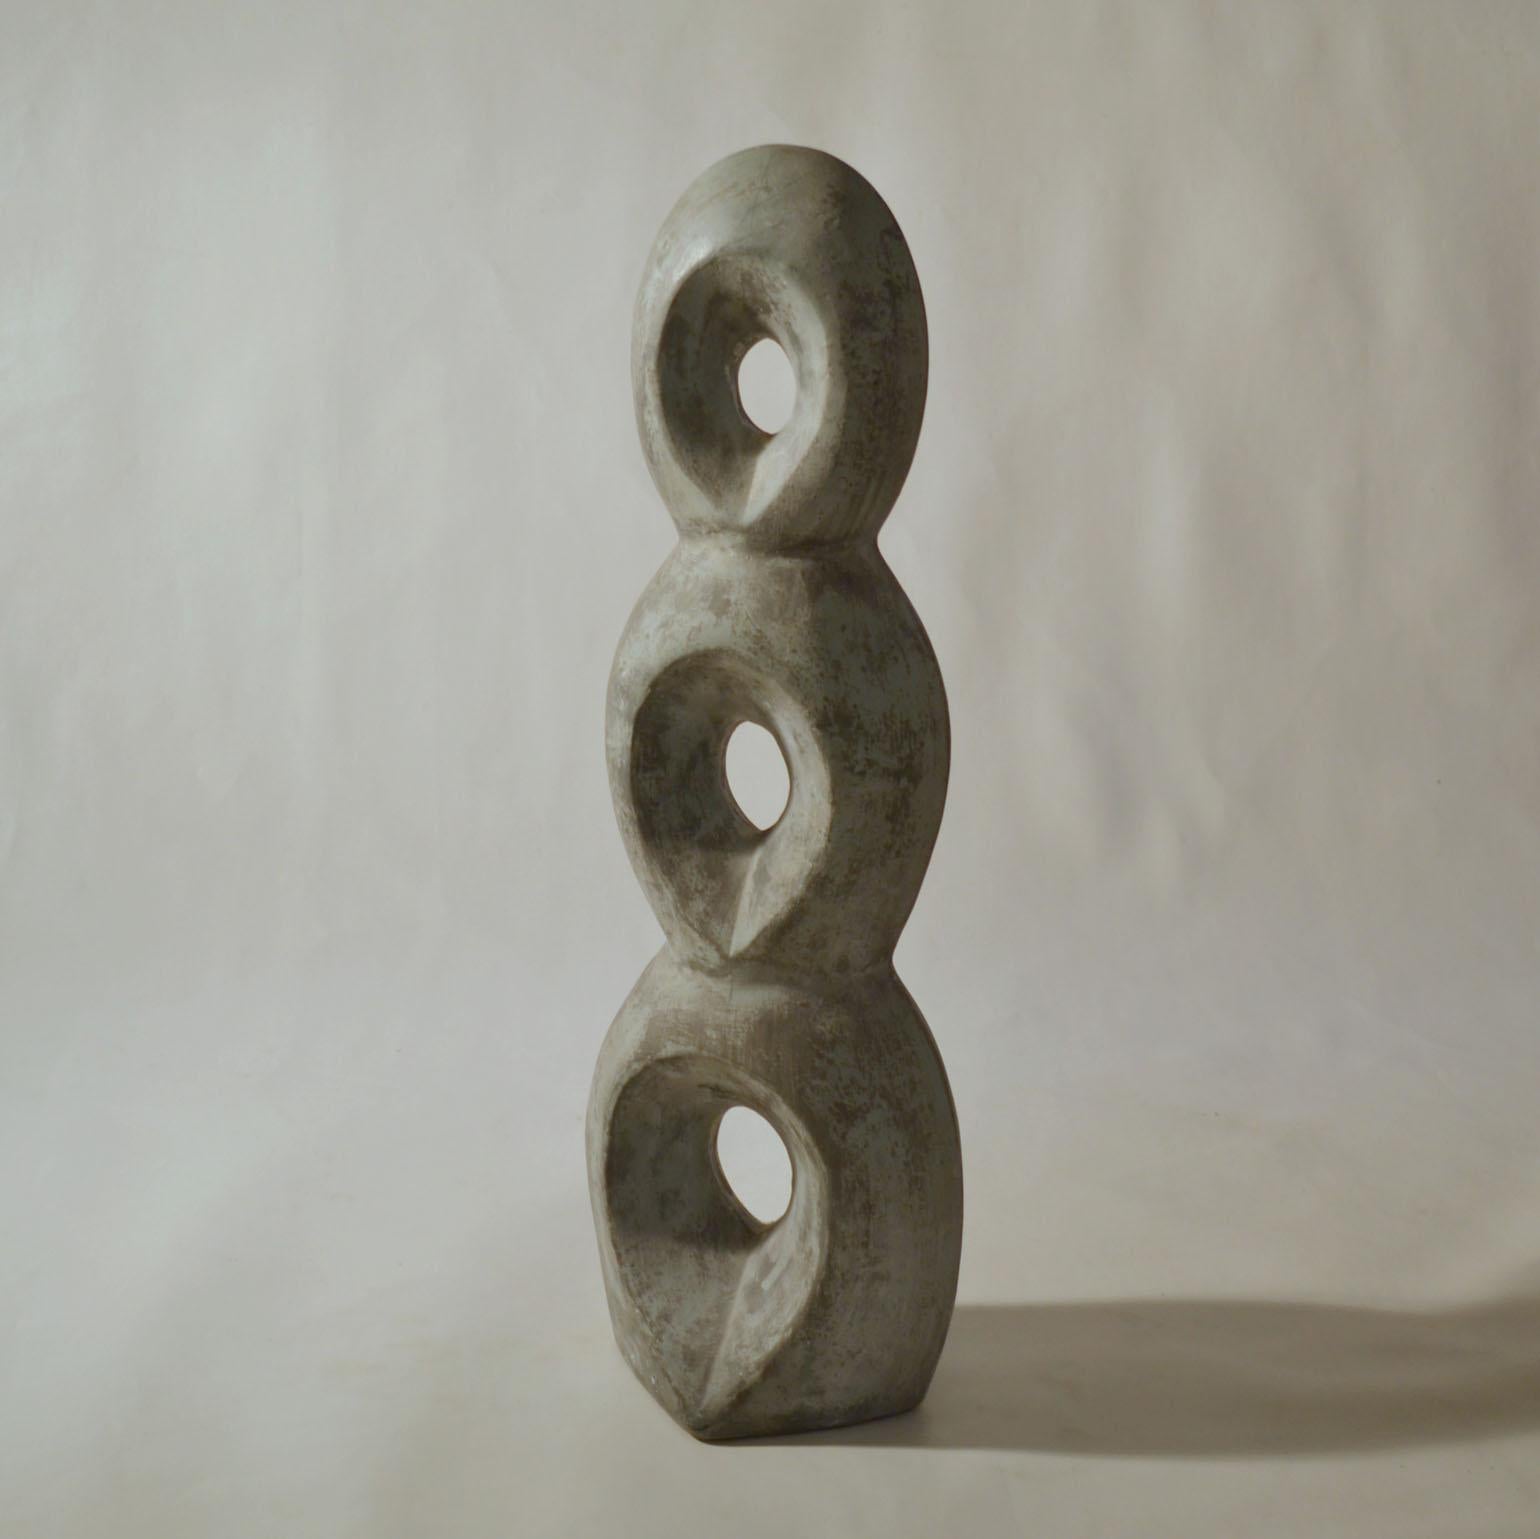 Hand formed abstract freestanding ceramic sculpture with matt grey glaze is made in the 1960s.